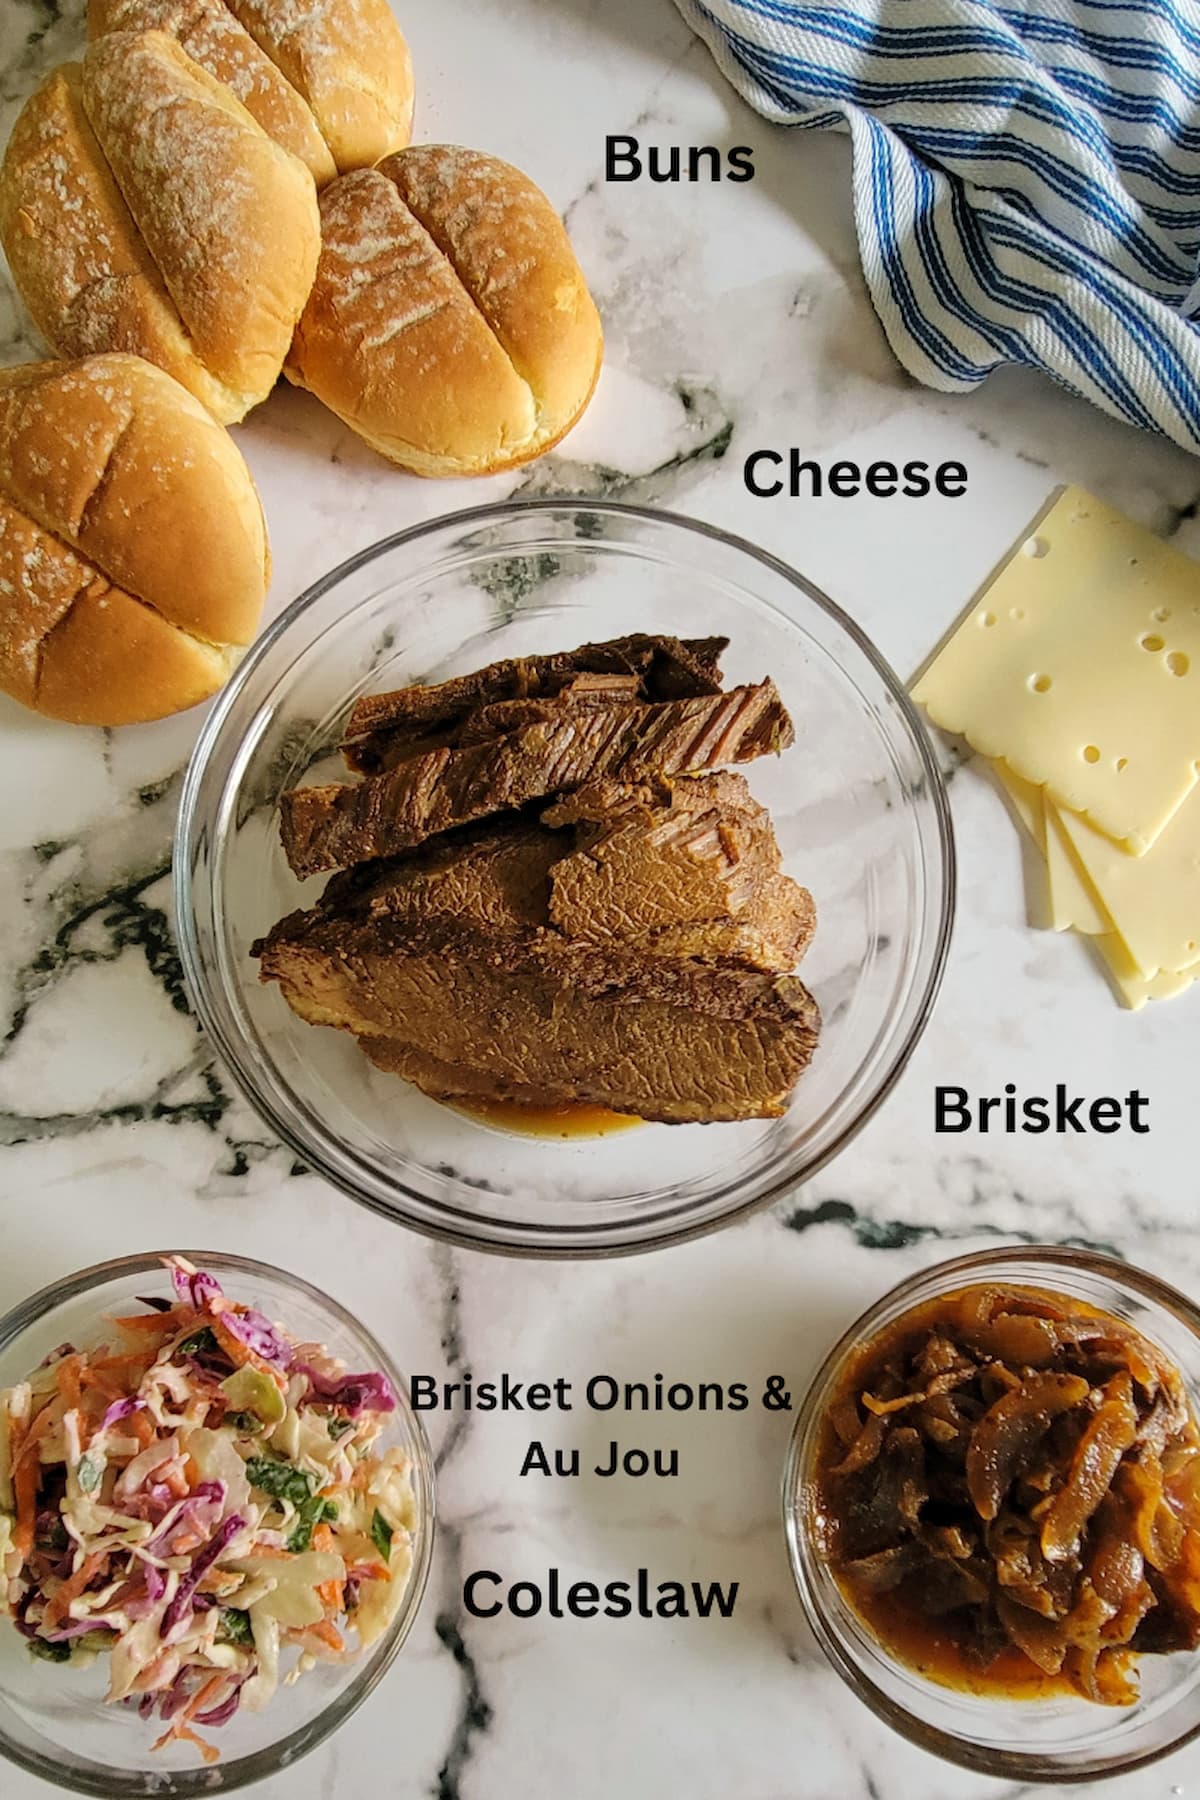 ingredients for brisket of beef sandwich - brisket, buns, cheese, coleslaw, onions and au jus